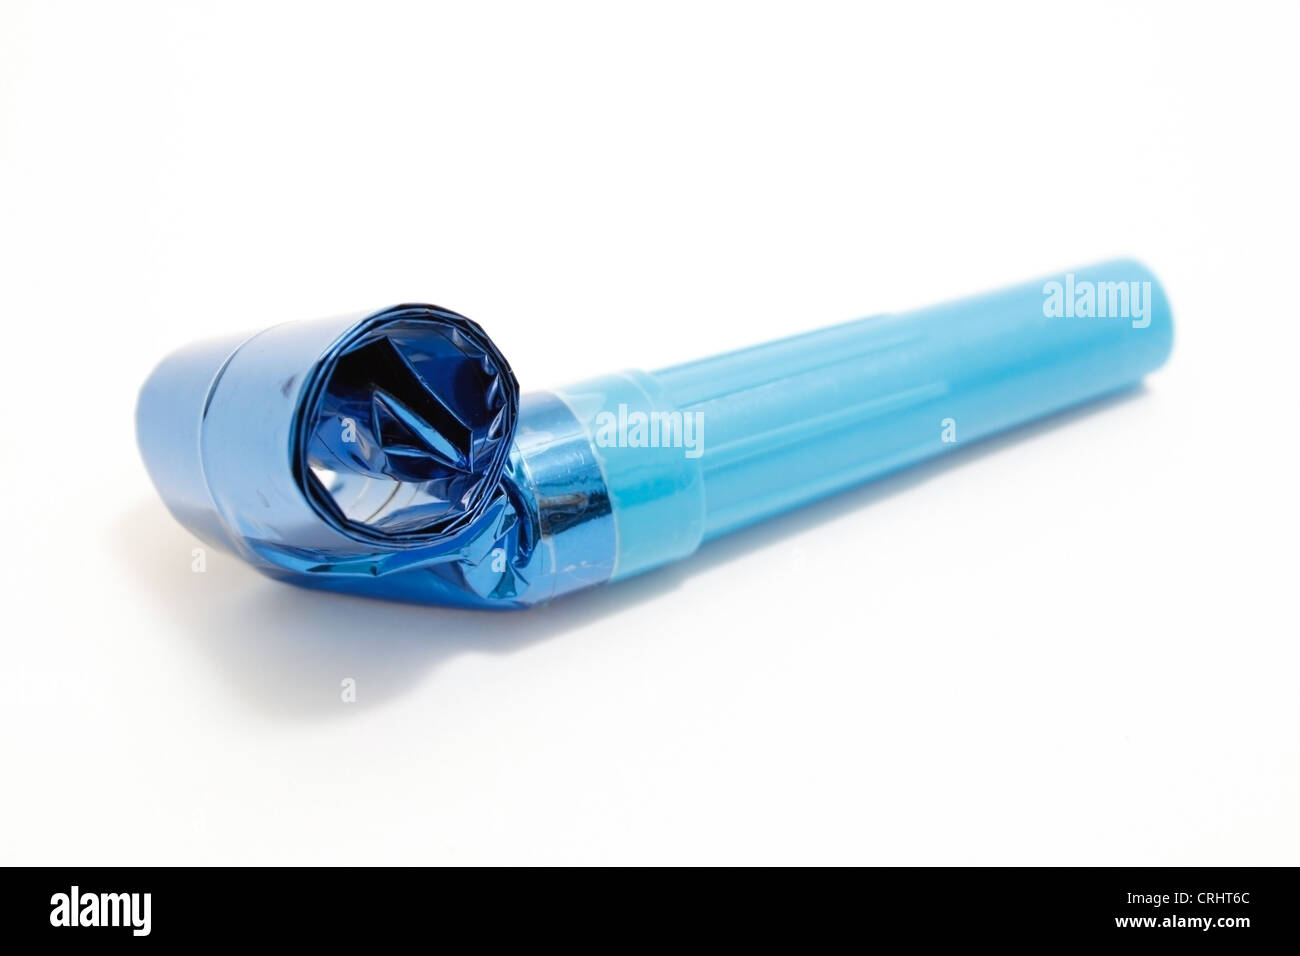 Party favor horn isolated stock photo. Image of clipping - 24015414